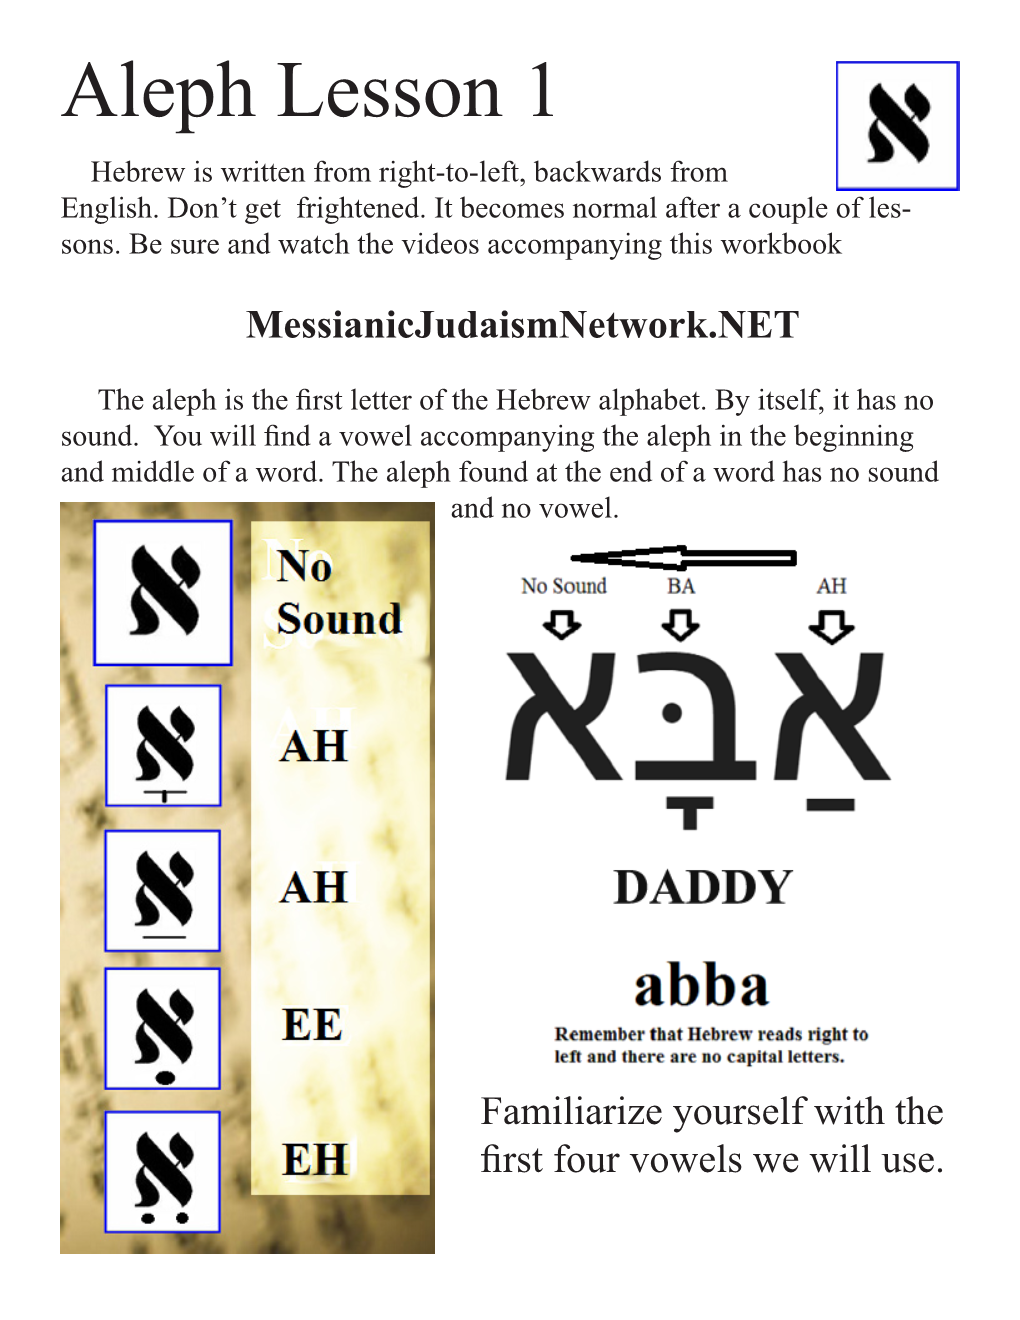 Aleph Lesson 1 Hebrew Is Written from Right-To-Left, Backwards from English